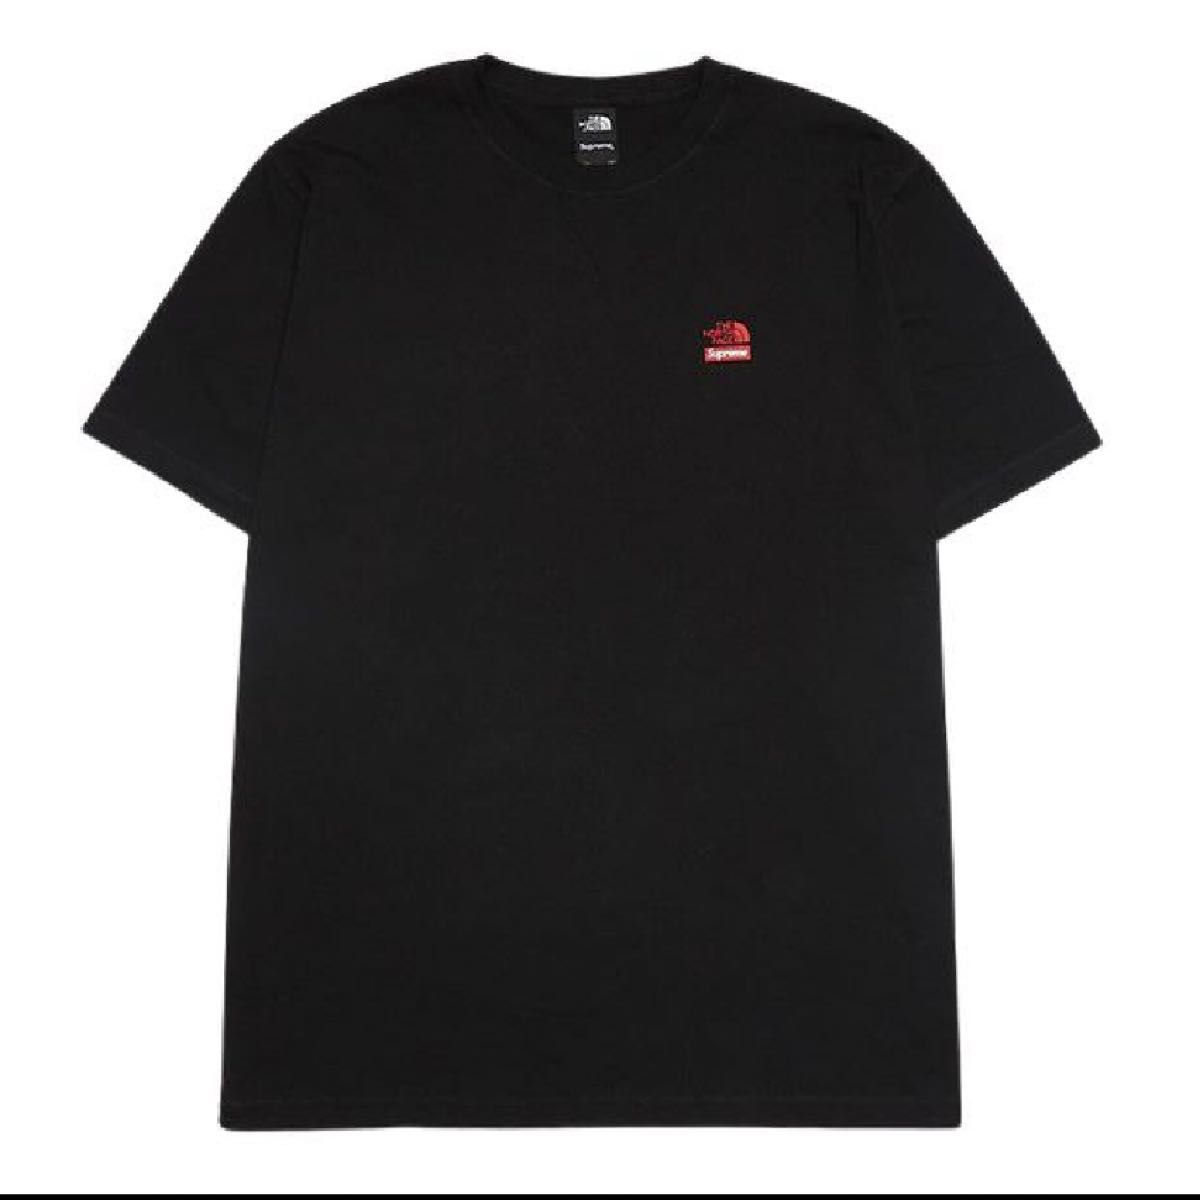 Supreme / The North Face Statue of Liberty Tee "Black"